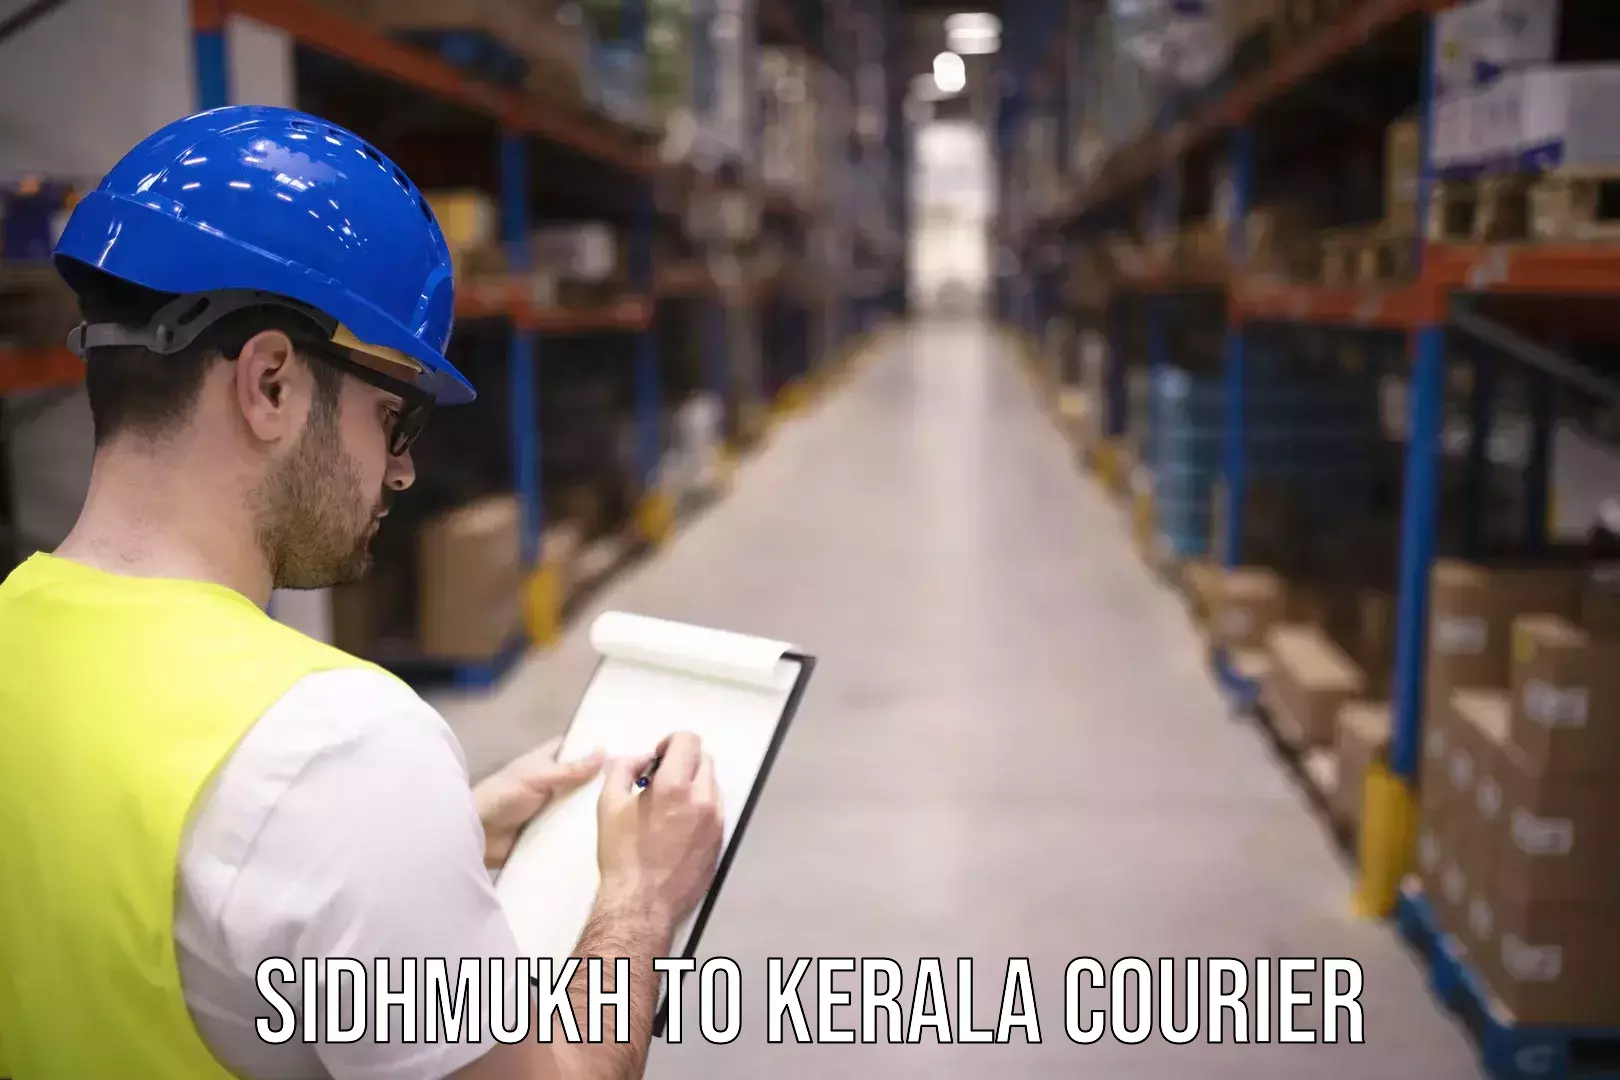 Advanced delivery network Sidhmukh to Kerala